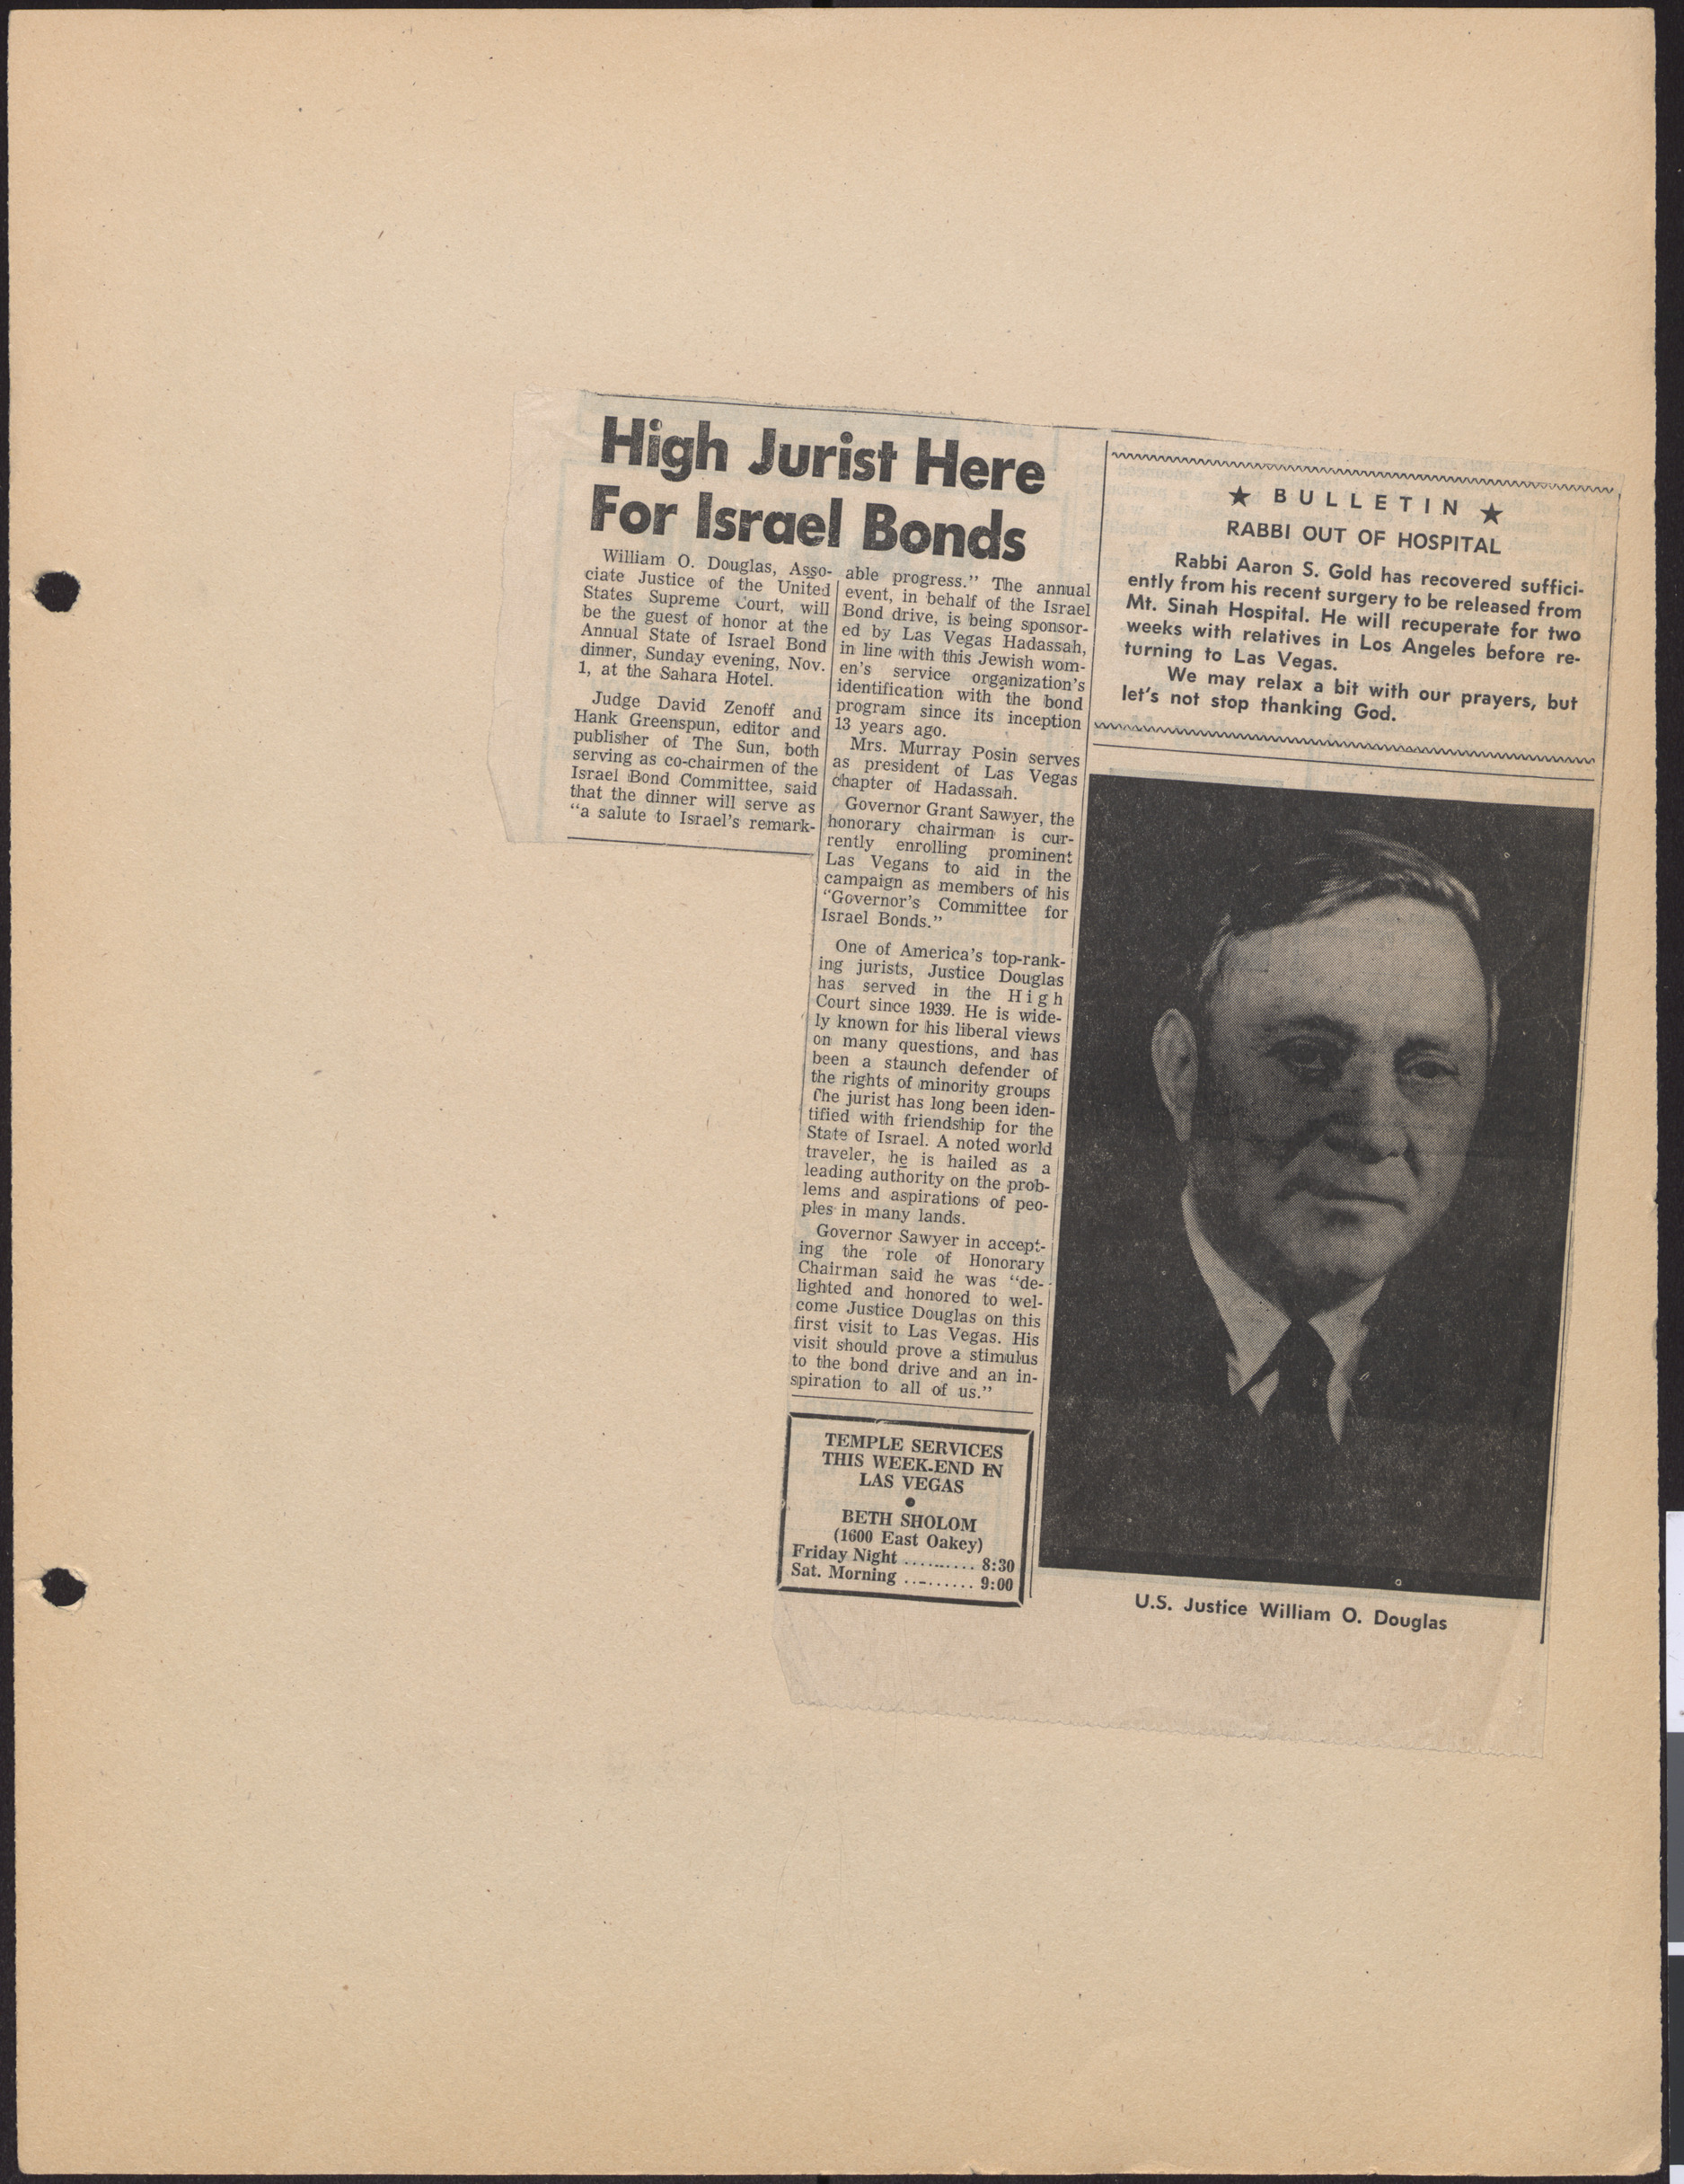 Newspaper clipping, High Jurist Here for Israel Bonds, publication and date unknown